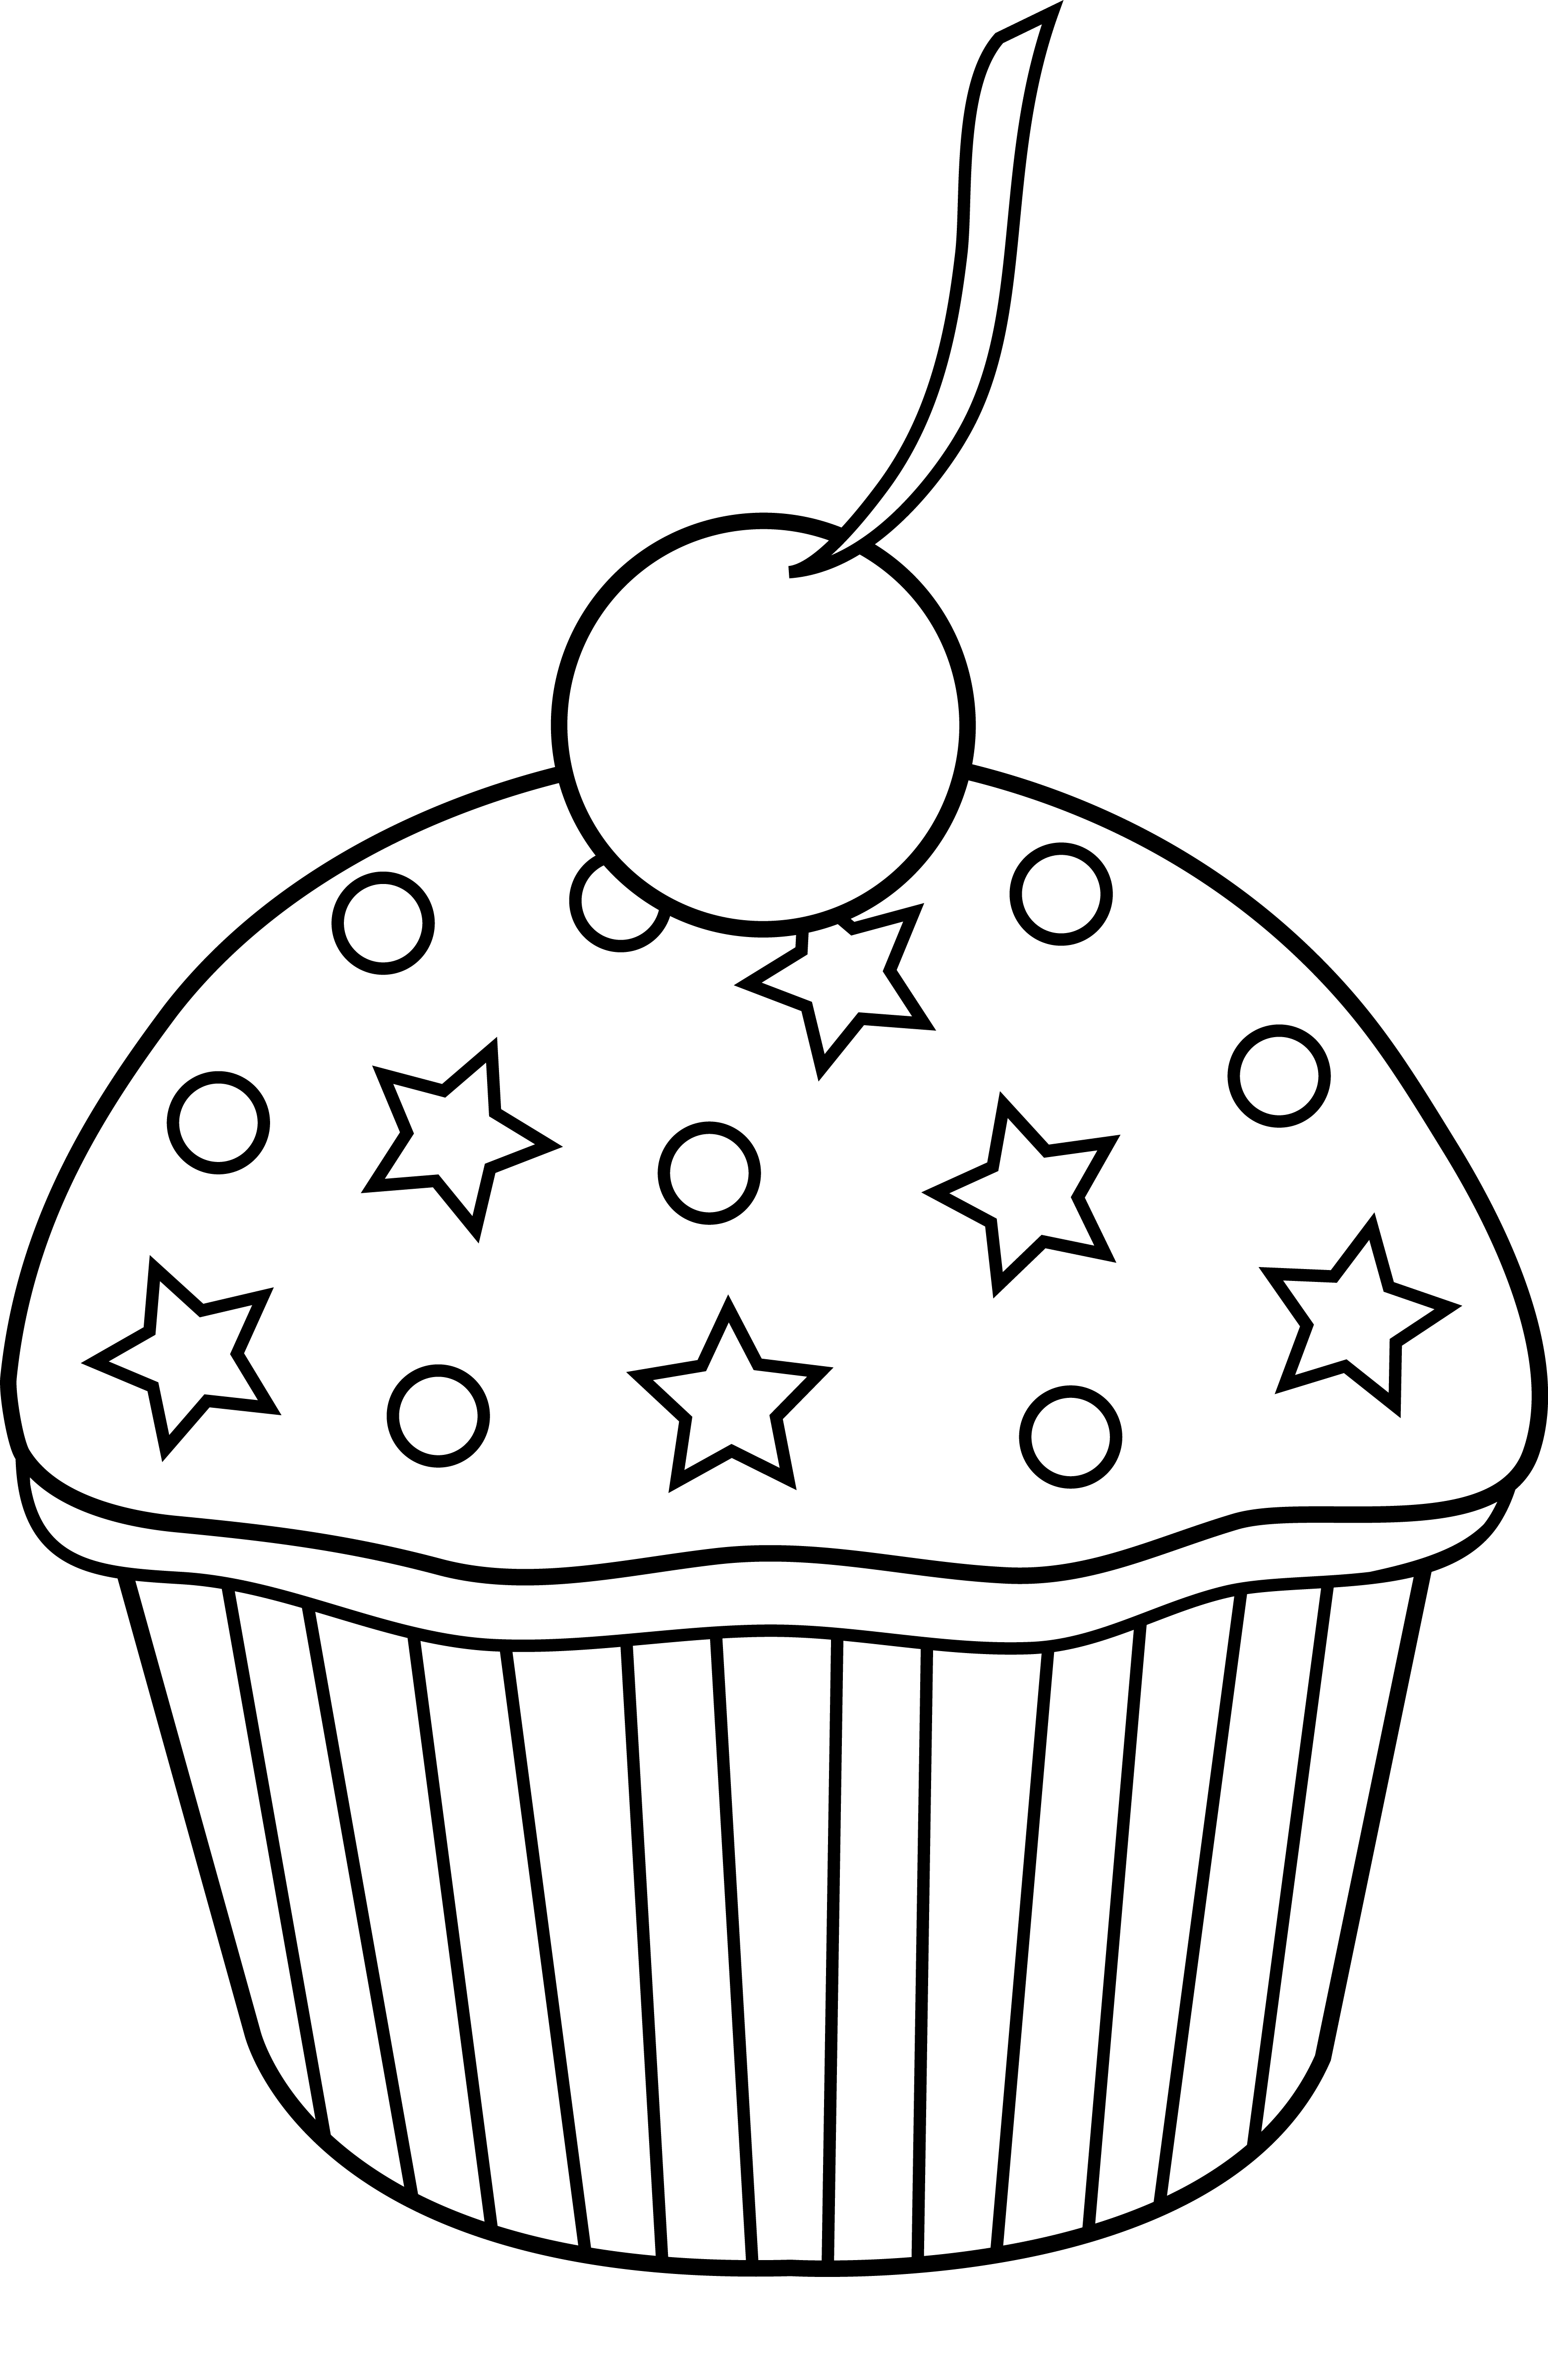 Cupcake  black and white cupcake clipart black and white free images 8